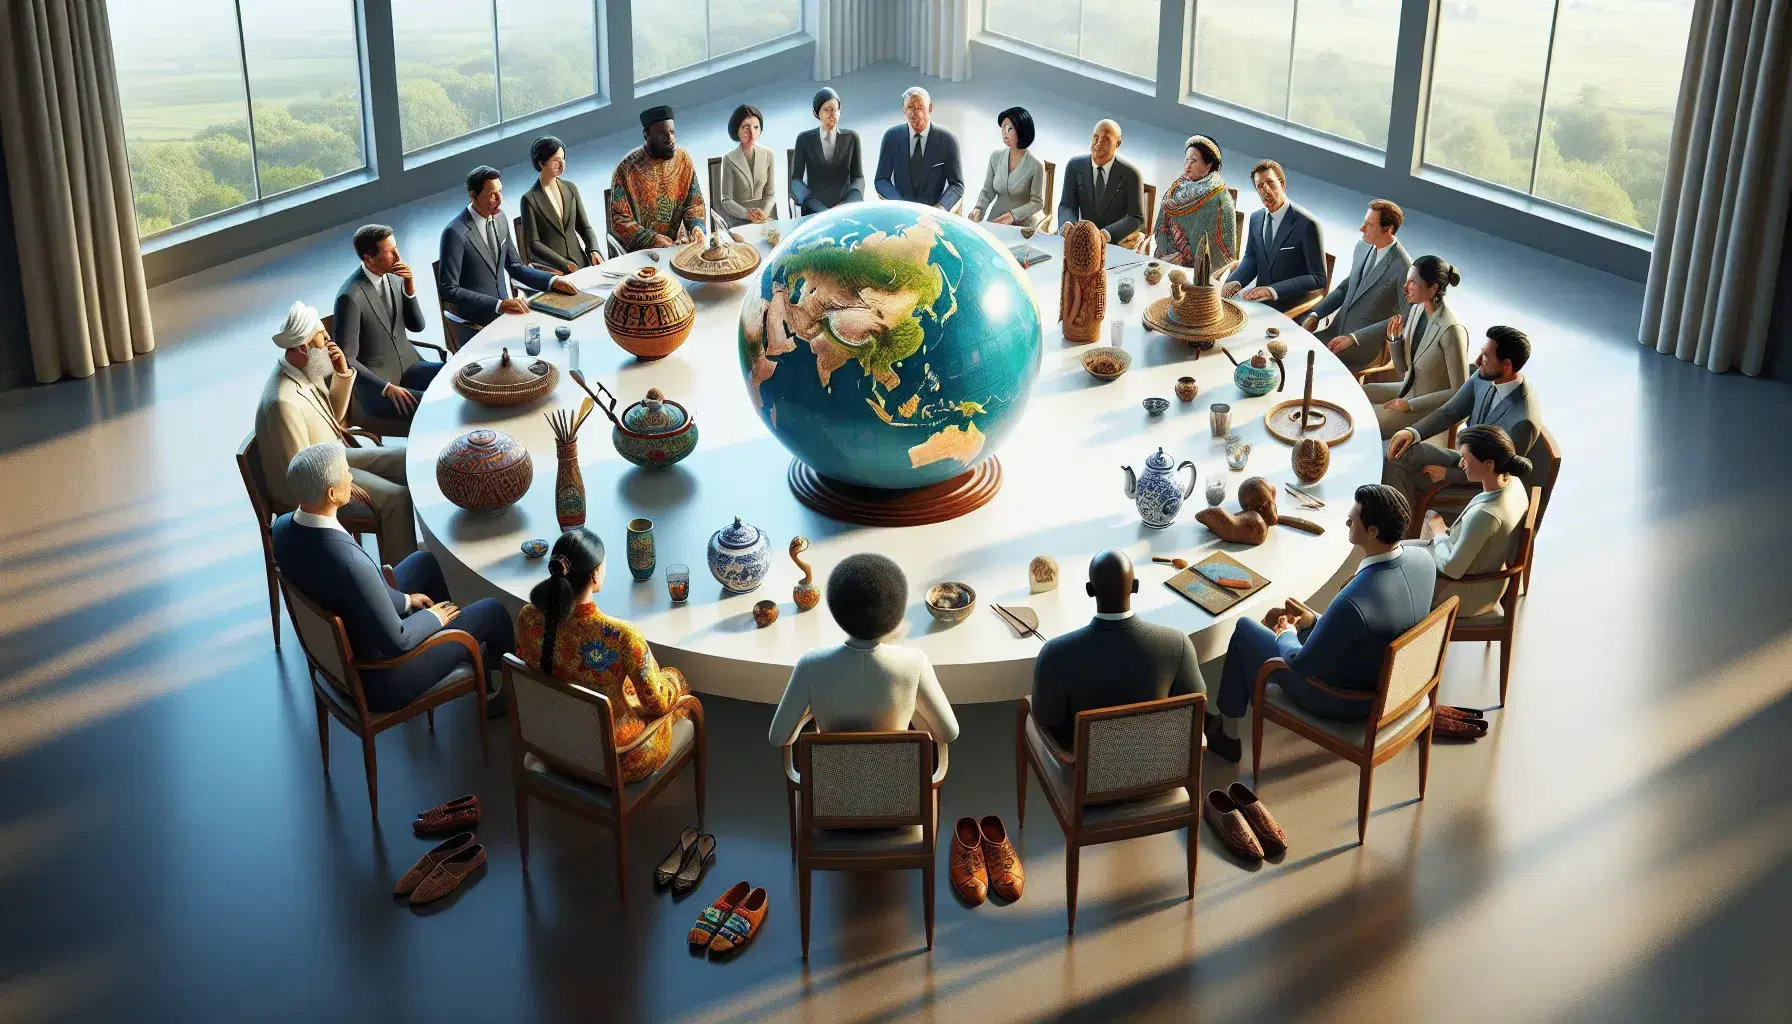 Diverse professionals in formal wear engage in a meeting around a table with a globe and multicultural artifacts in a sunlit room.